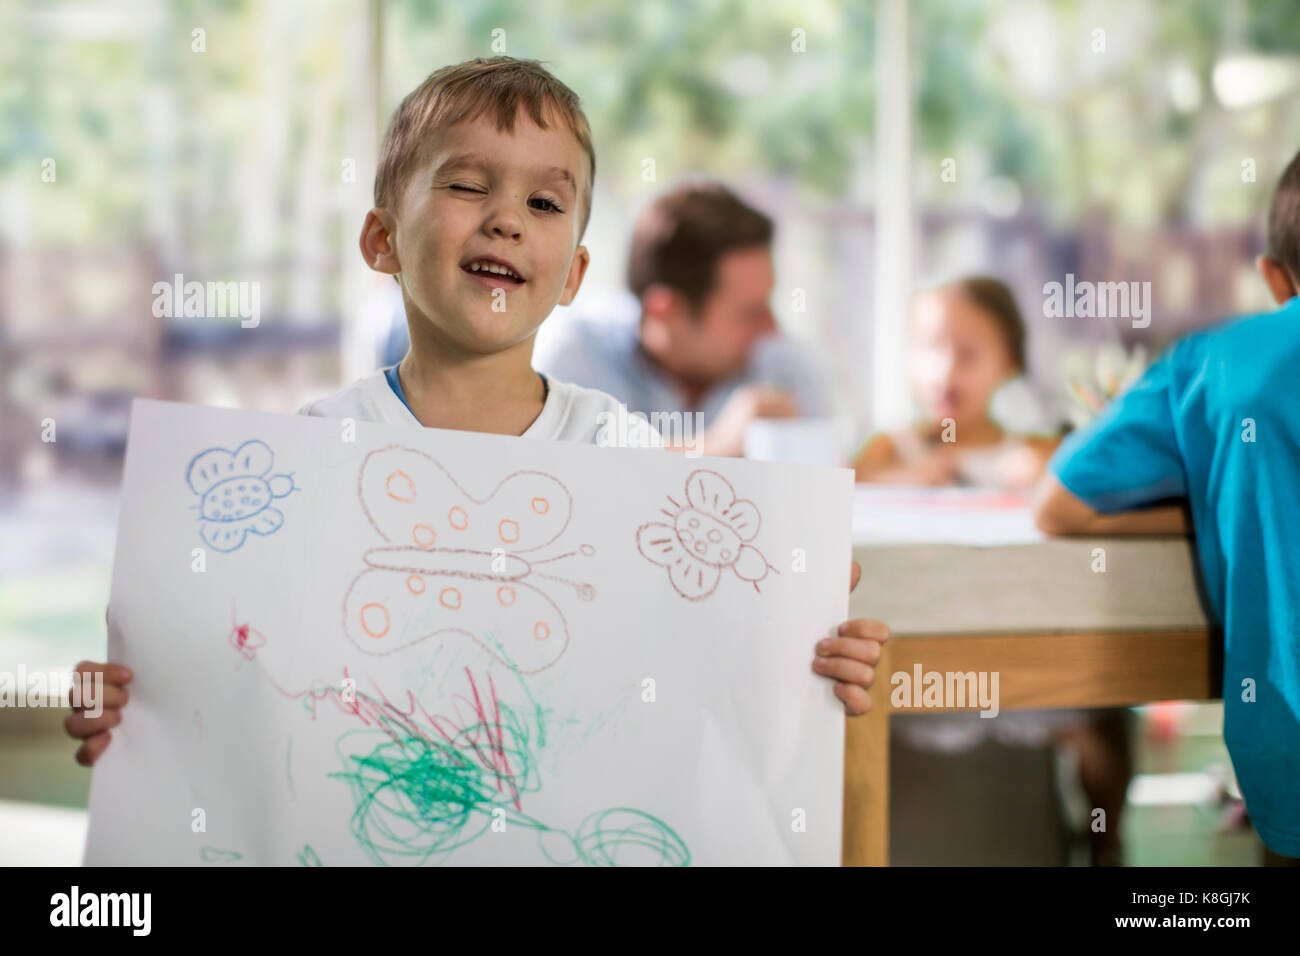 Boy showing drawing Stock Photo